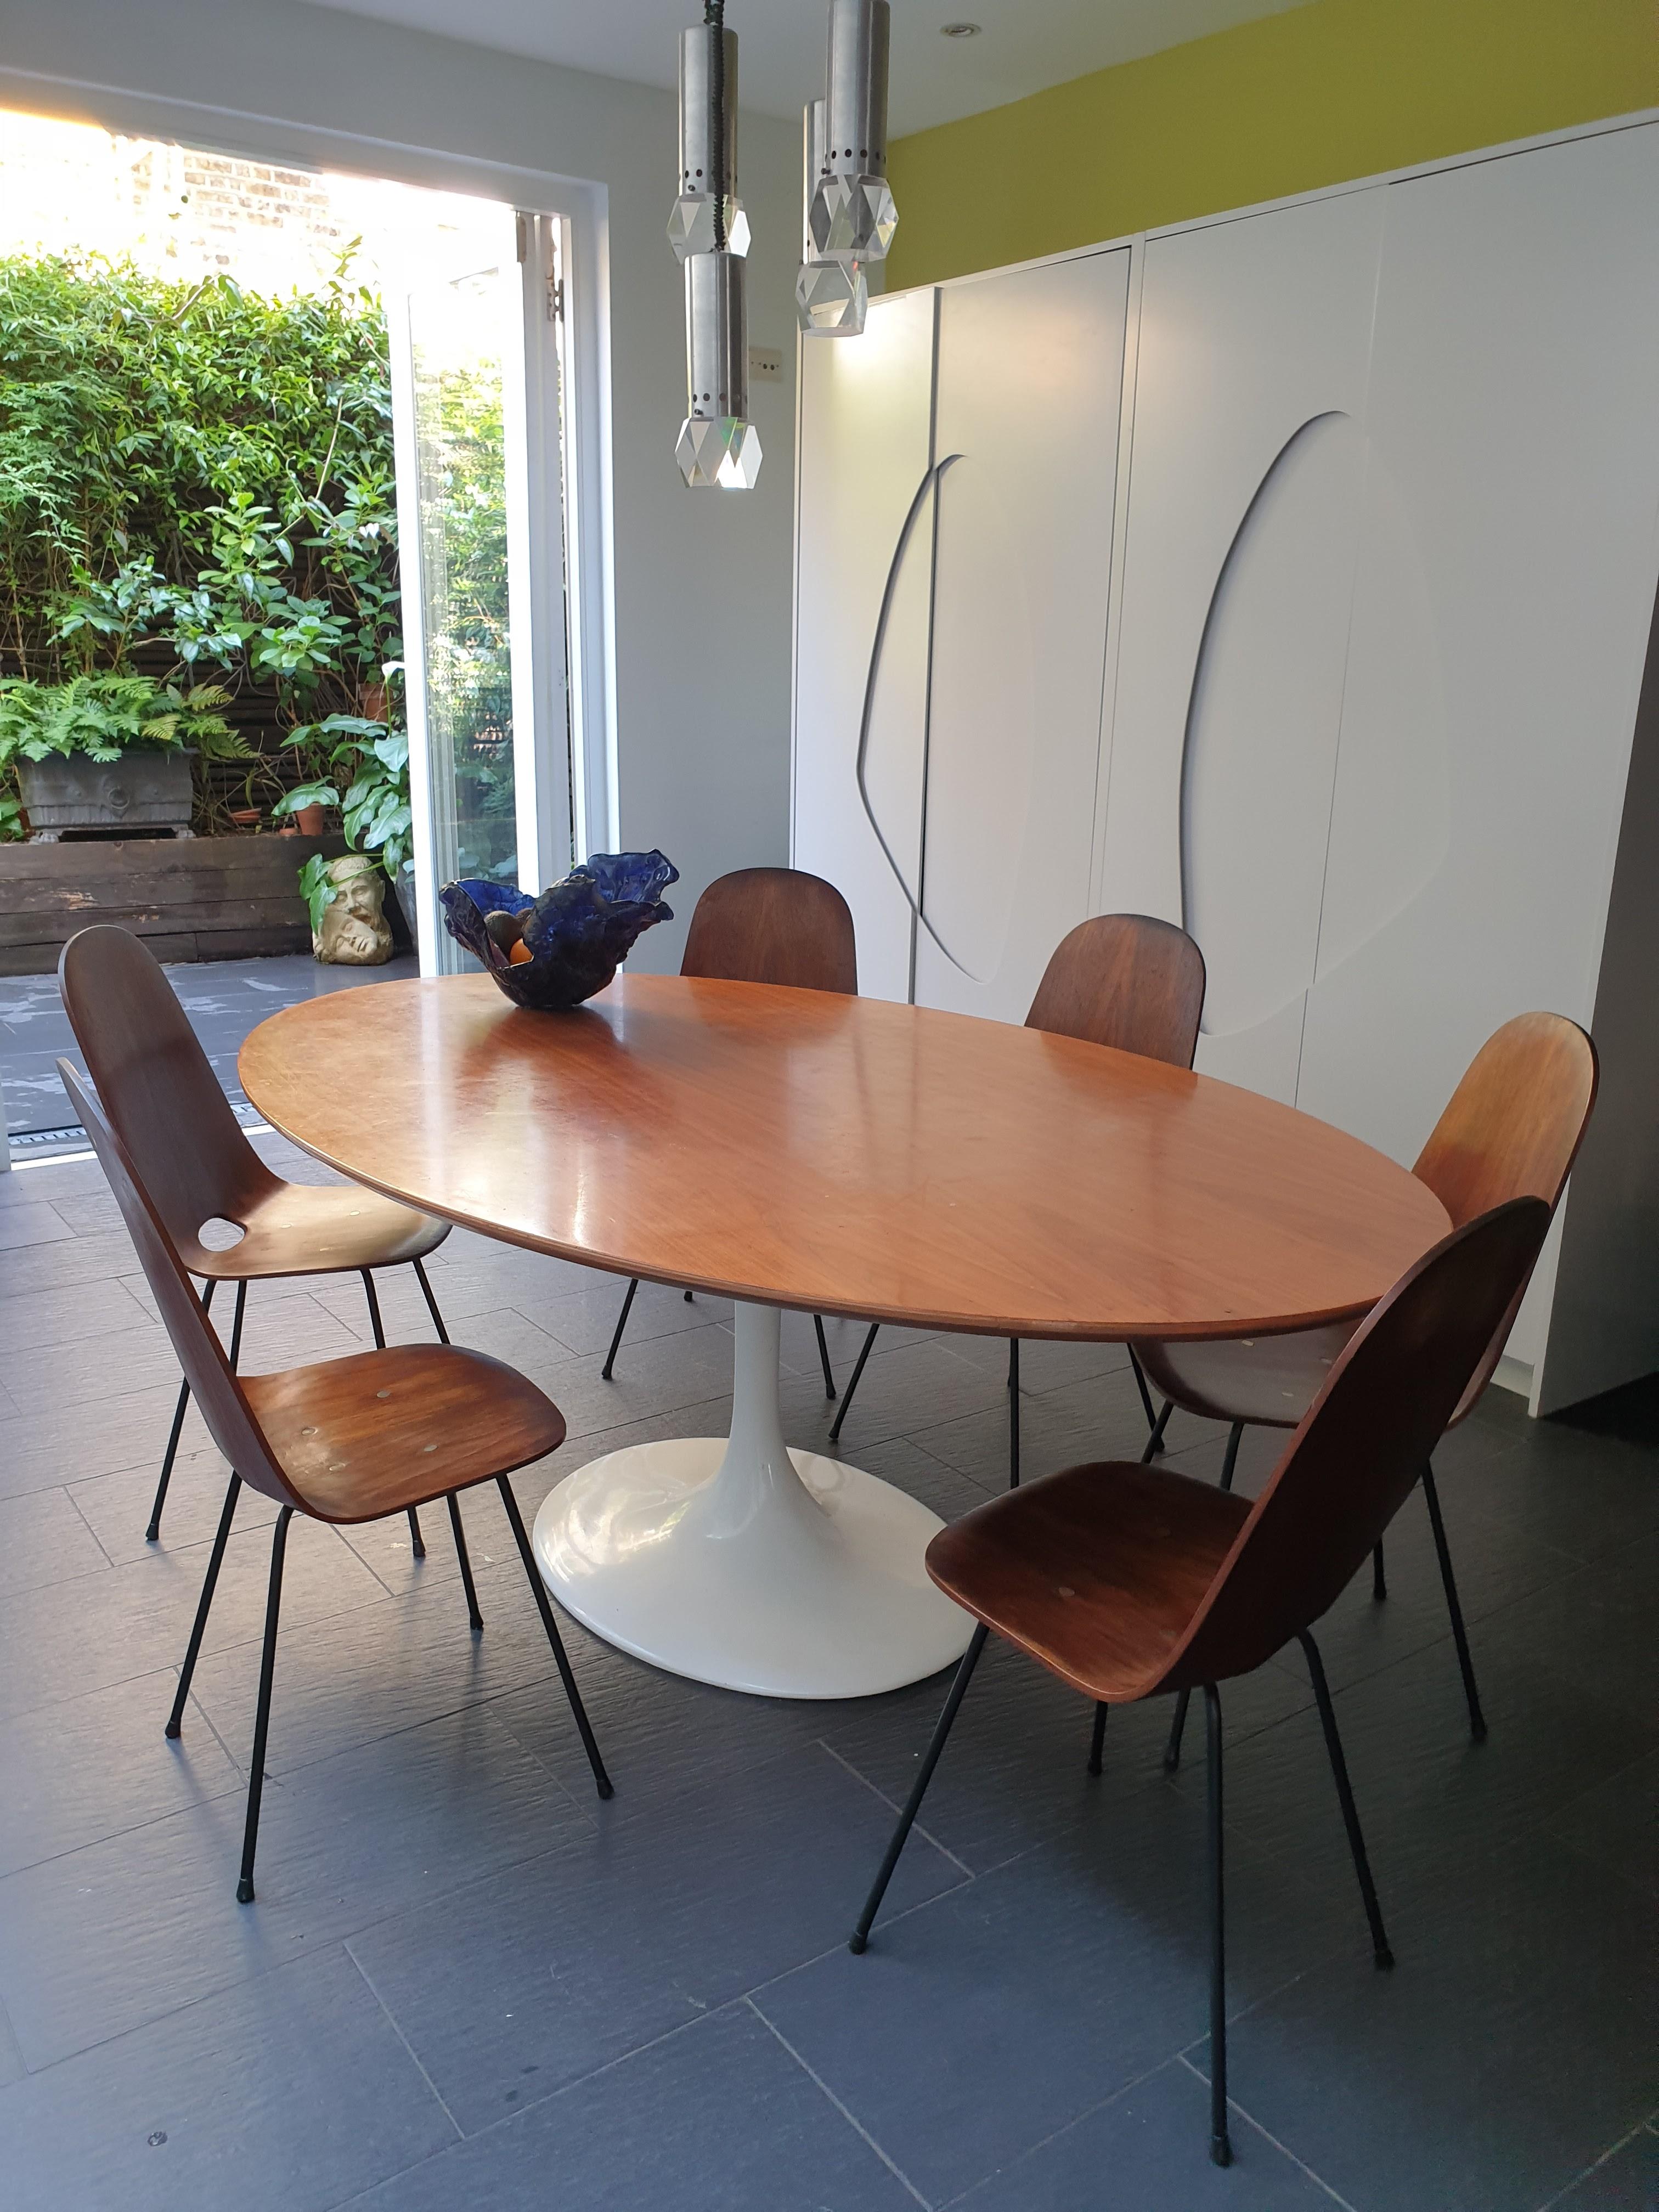 Set of six Modernist dining chairs with curved backs and lacquered metal legs, designed by Franco Campo and Carlo Graffi. These quality chairs have Rio rosewood veneer and brass studs. They are light and easy to transport due to the convenient cut